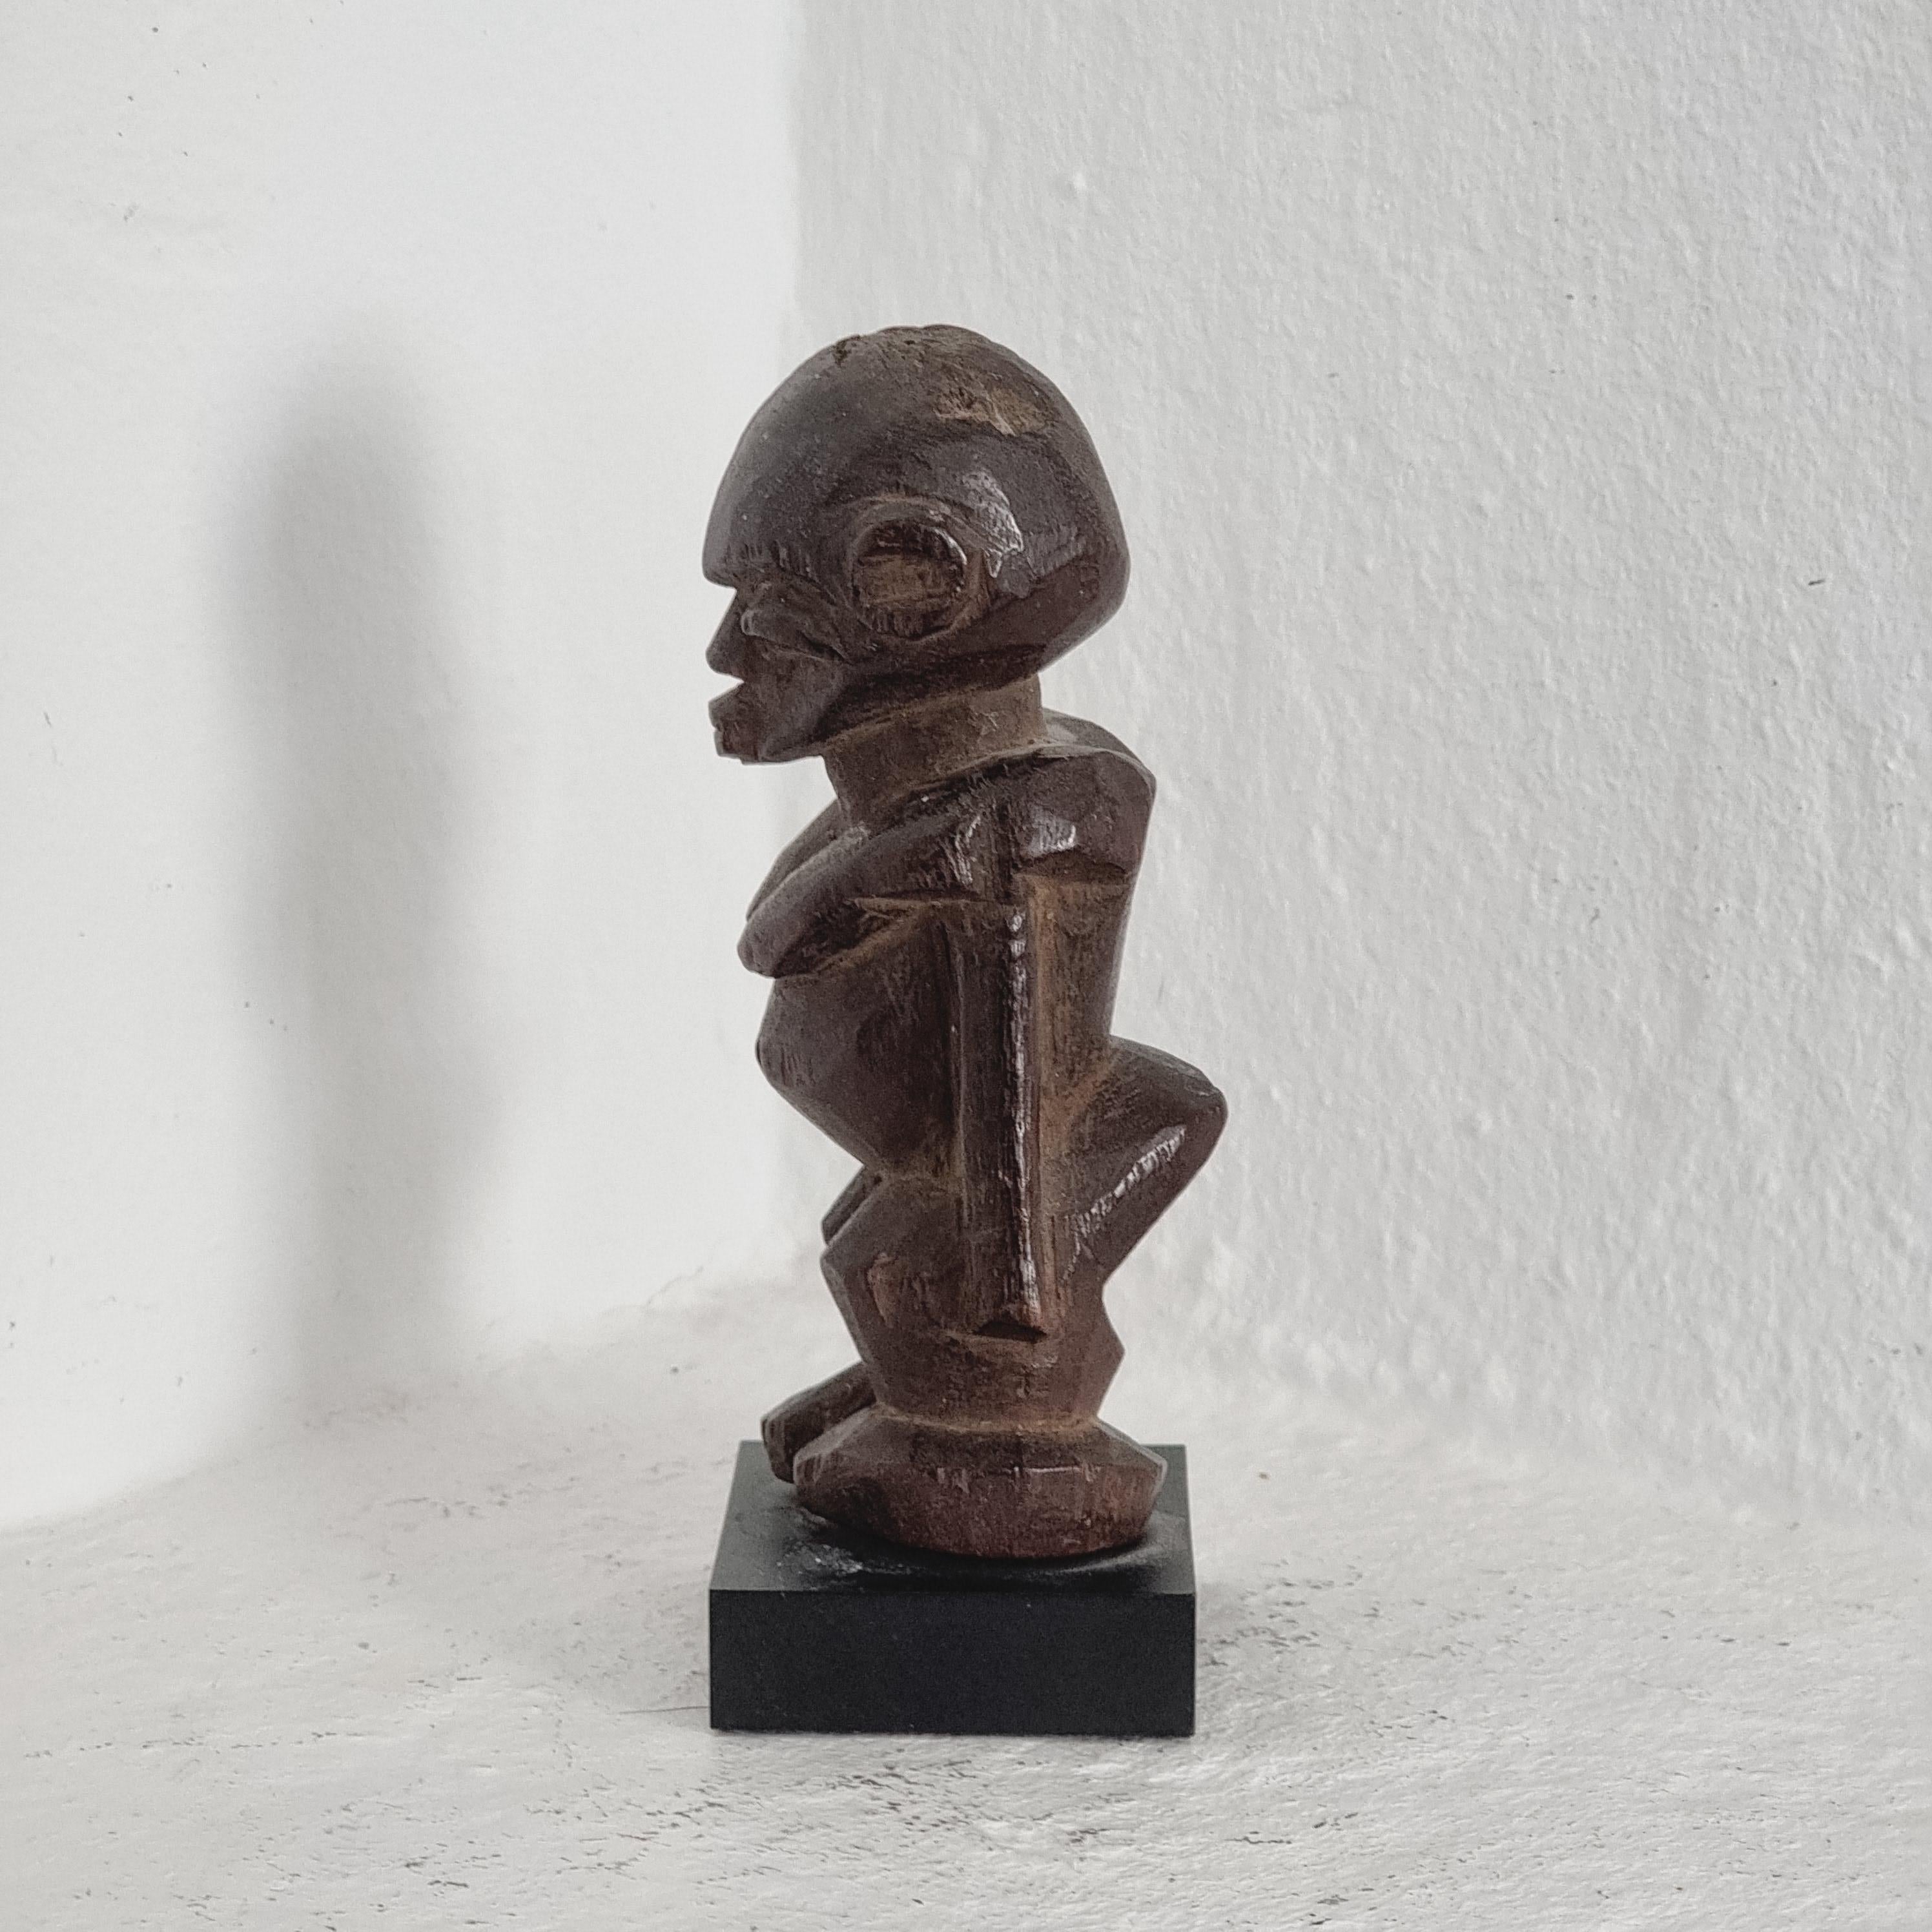 Sculpture, Lobi Male Figure with one hand pointing upwards, Burkina Faso. Mid/late-1900s. 

Height excl. base 13 cm. Total height 15 cm. Patina, signs of age.

Provenance: Dealer and collector Peter Willborg (1959-2019, Sweden).